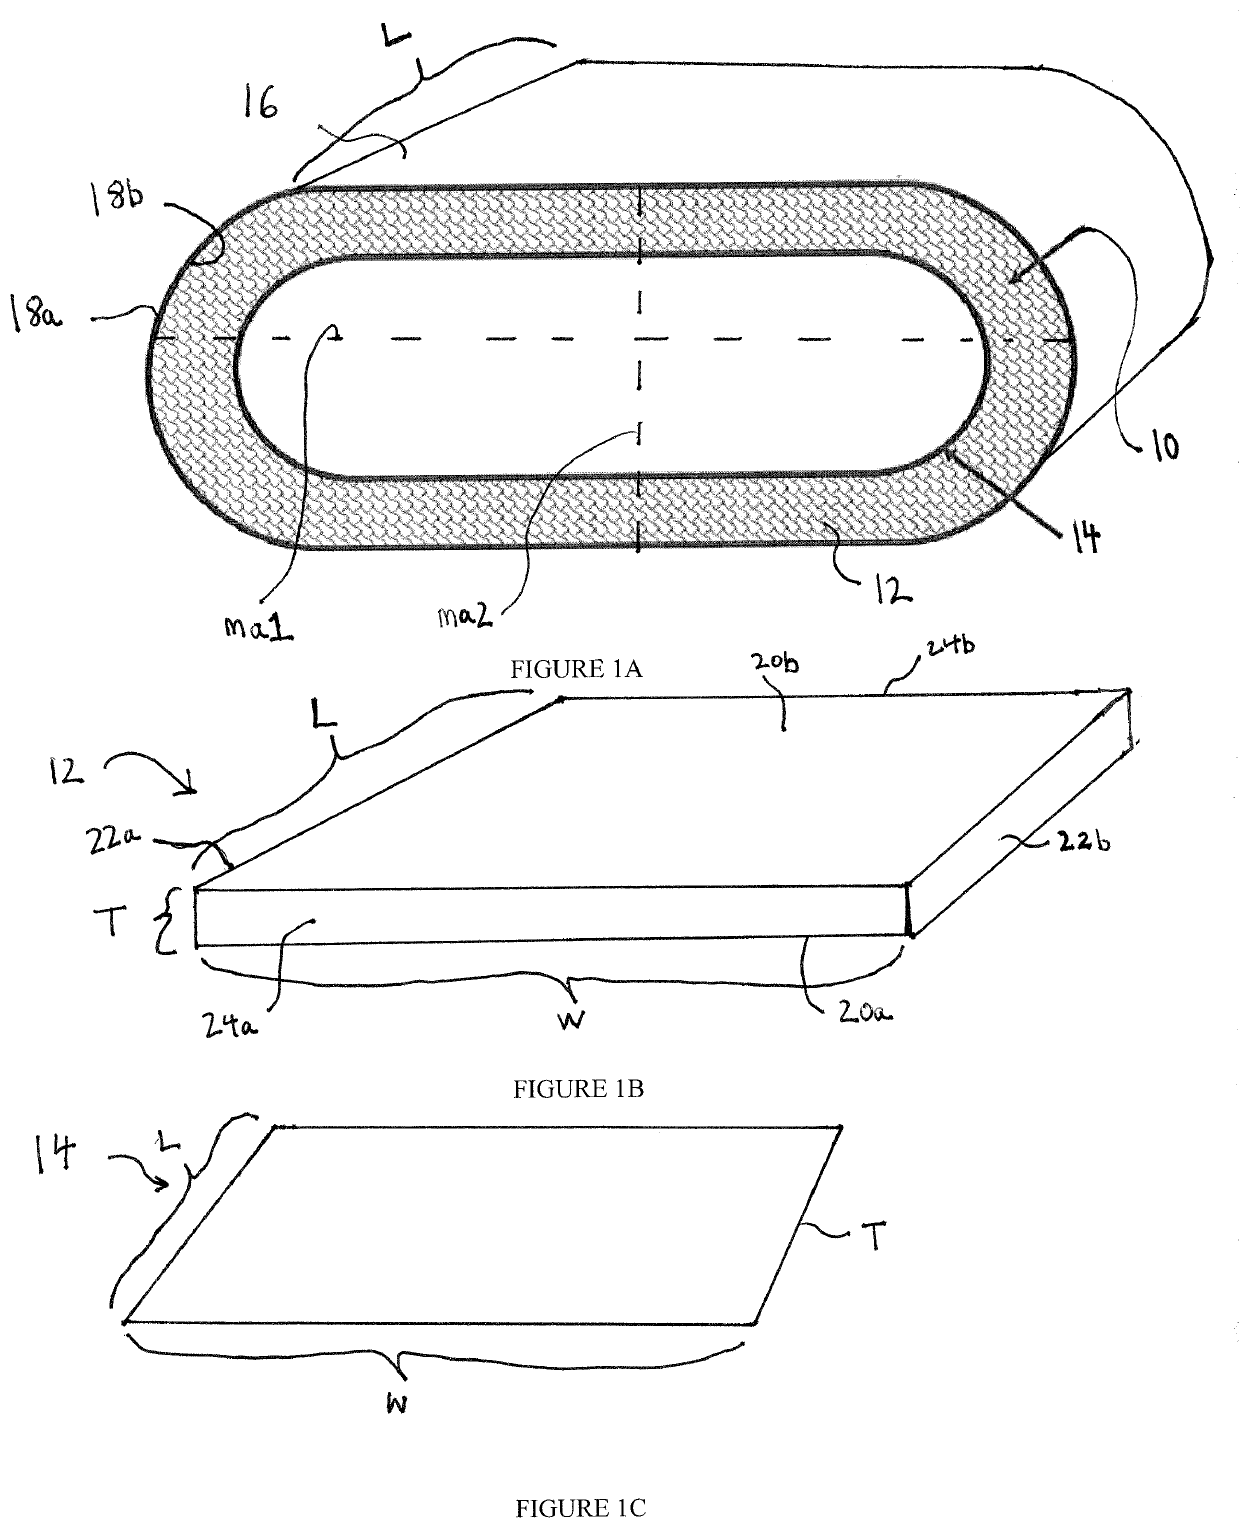 Methods and materials to universally fit duct liner insulation for oval HVAC duct systems